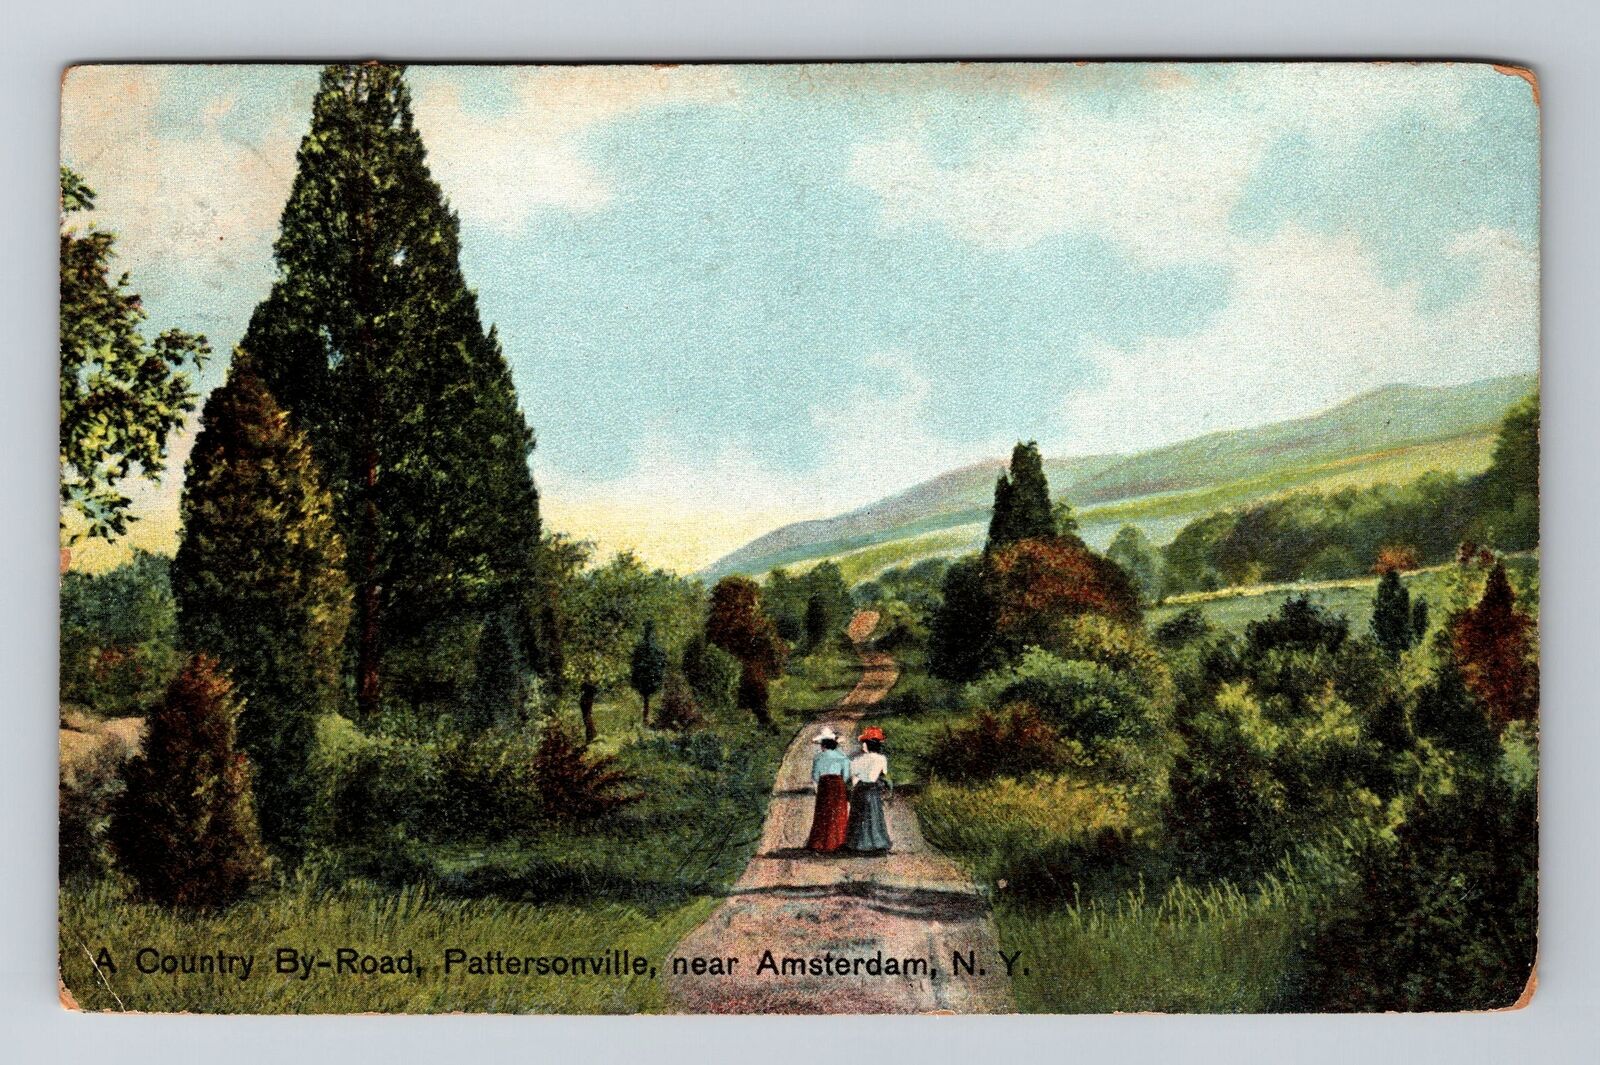 Amsterdam NY-New York, County By Road, Scenic View, Vintage Postcard